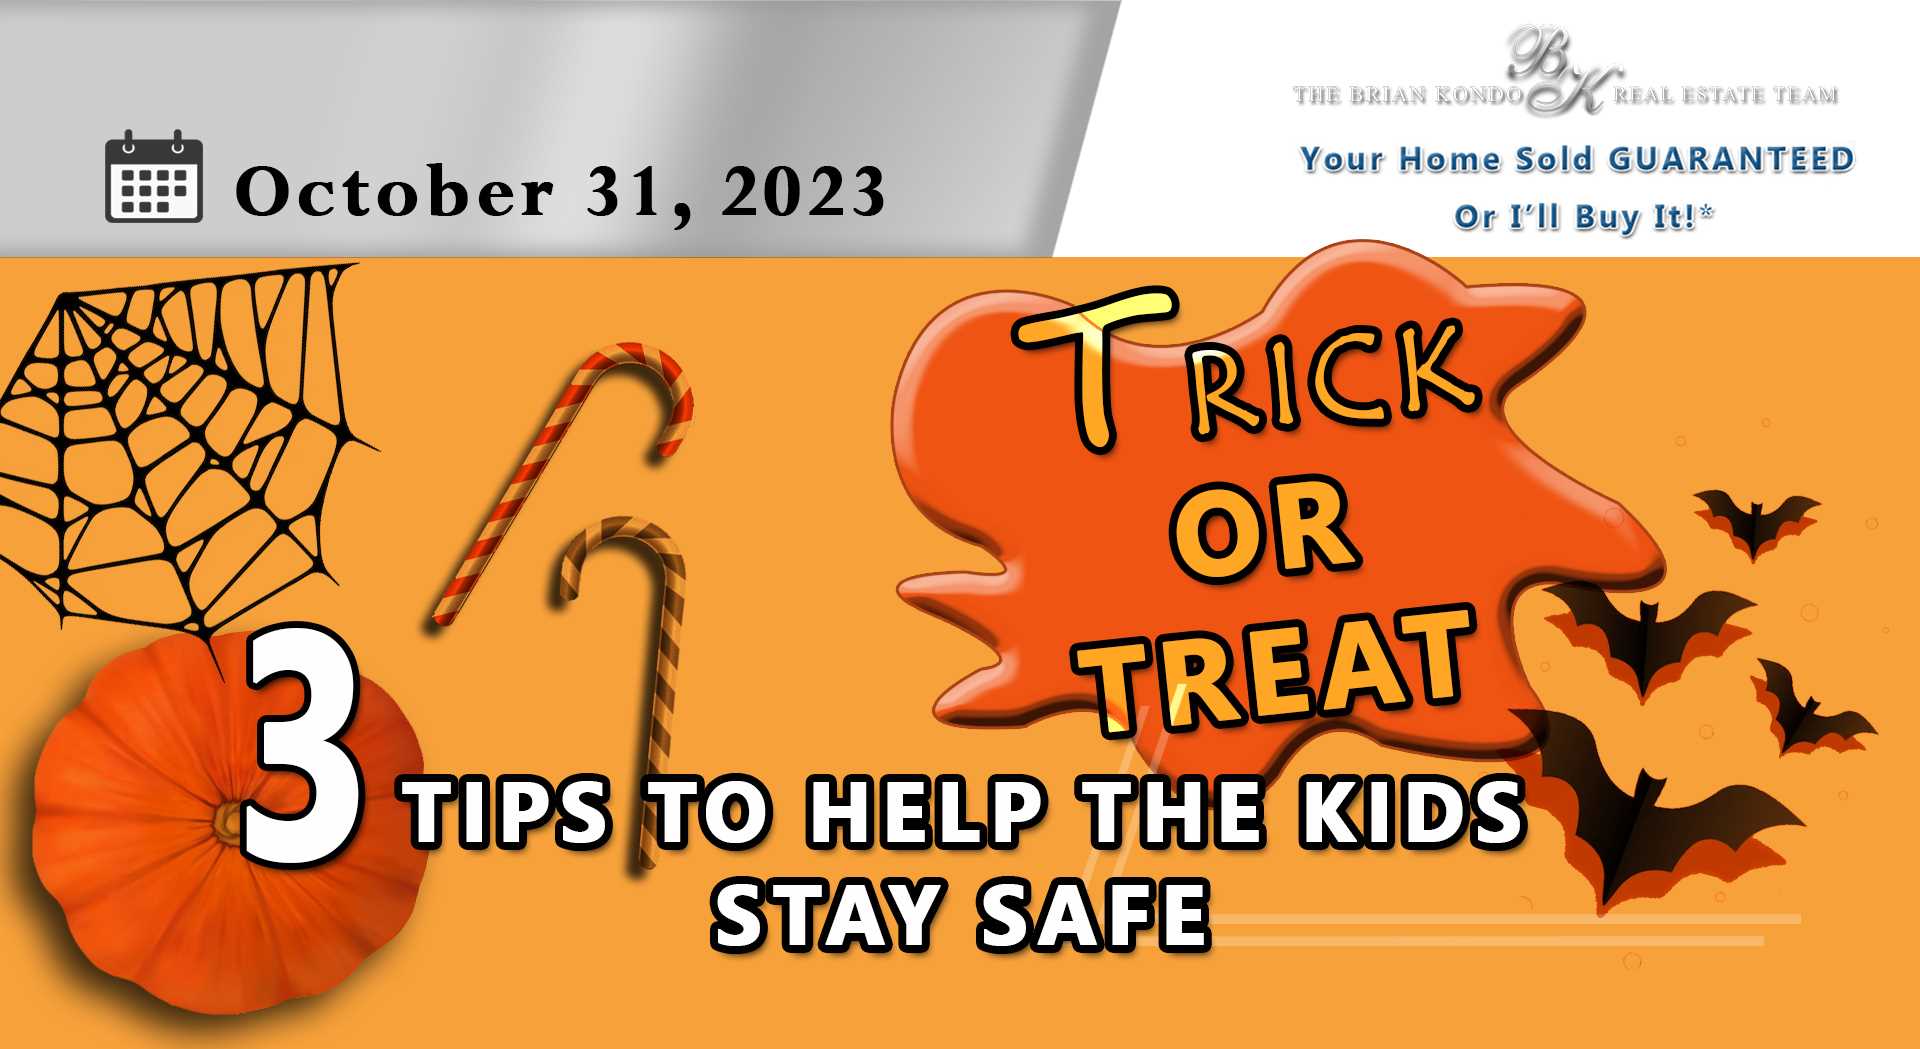 TRICK OR TREAT: 3 TIPS TO HELP THE KIDS STAY SAFE!